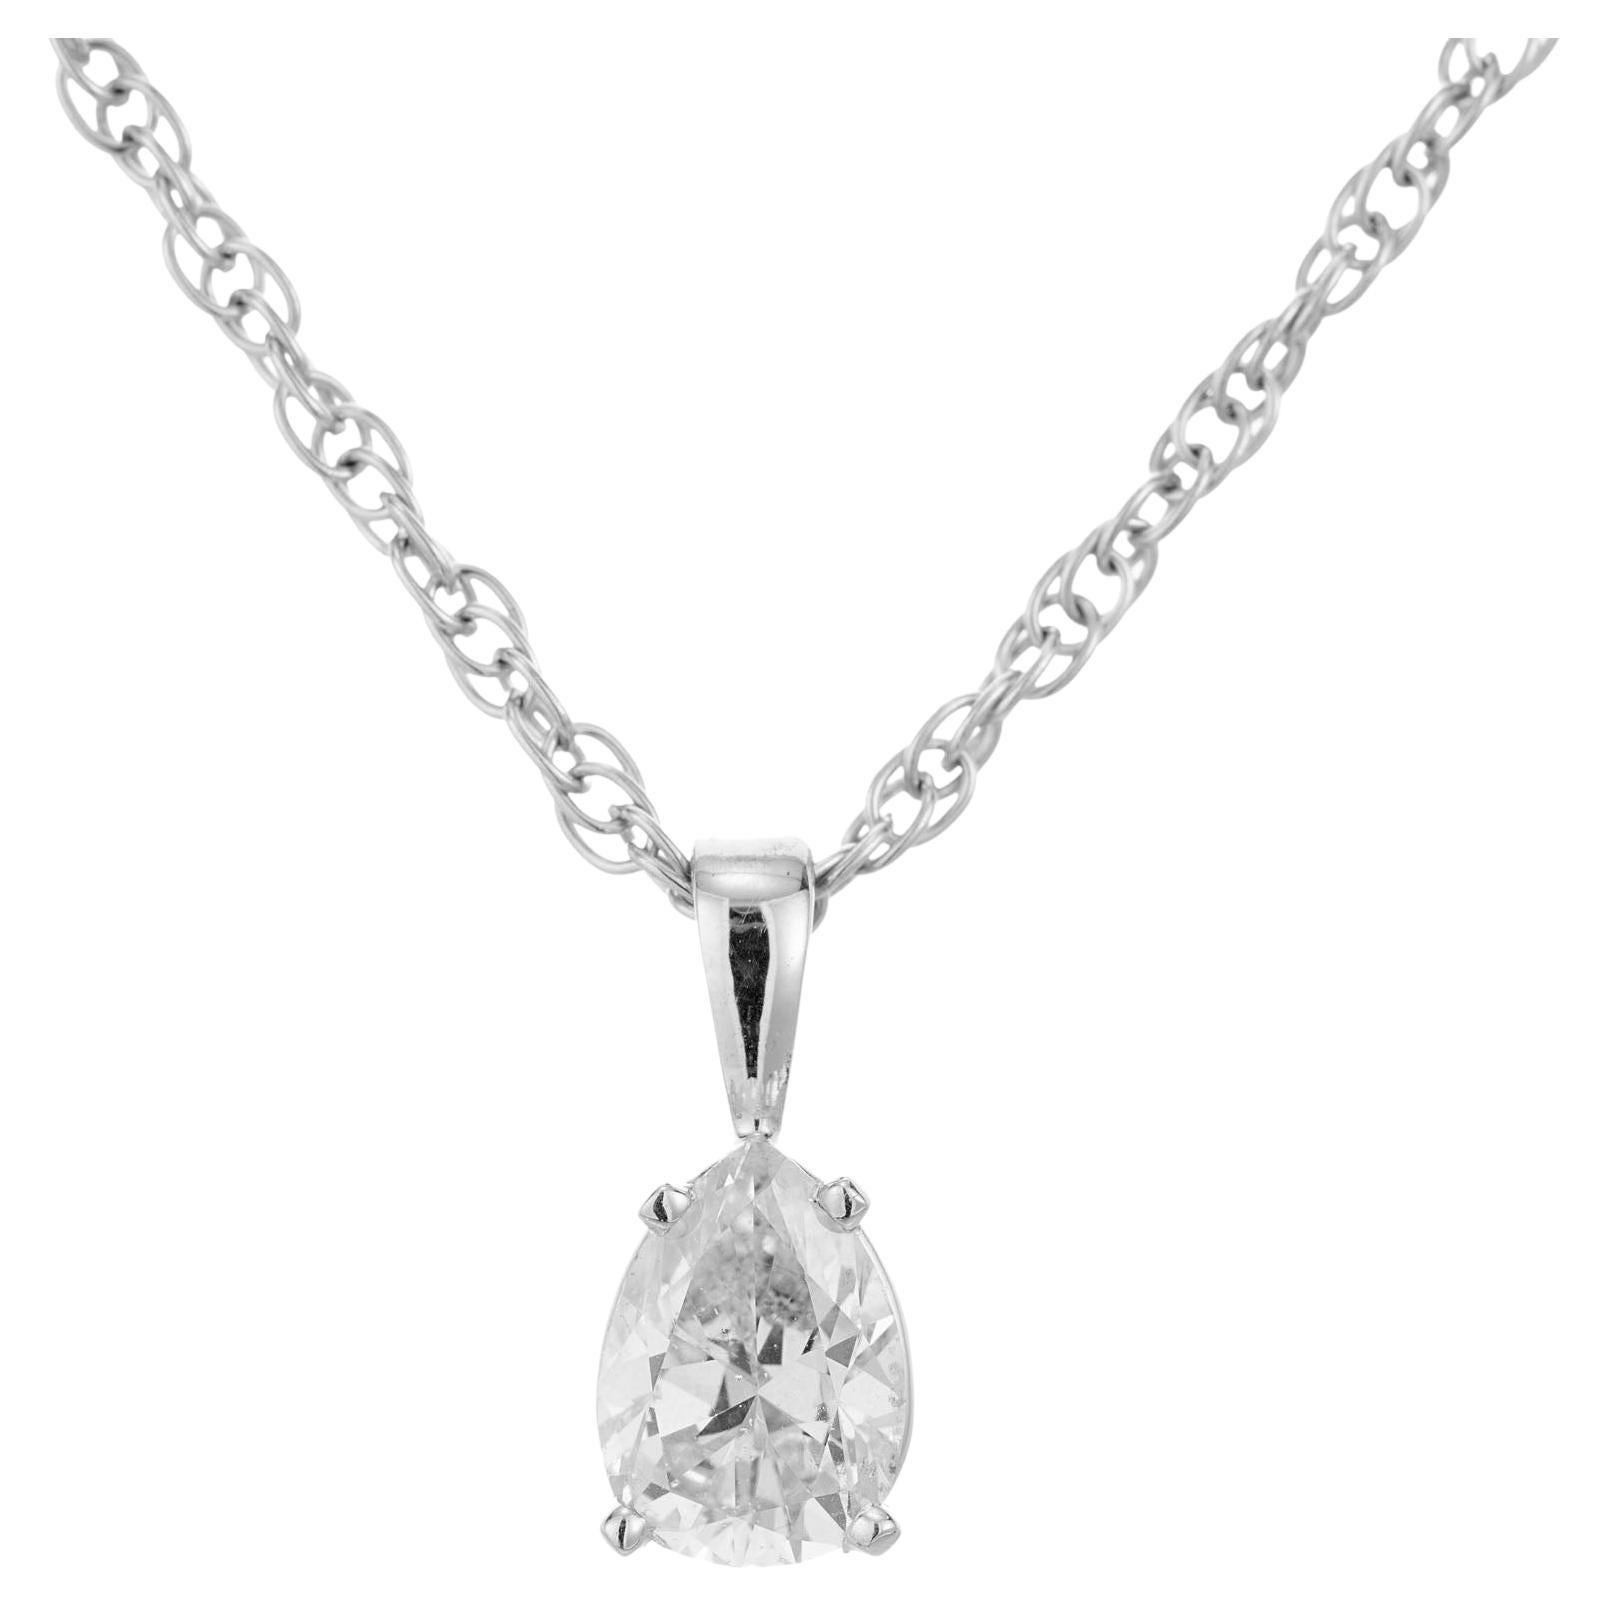 Peter Suchy GIA Certified 1.00 Carat Diamond White Gold Pendant Necklace For Sale